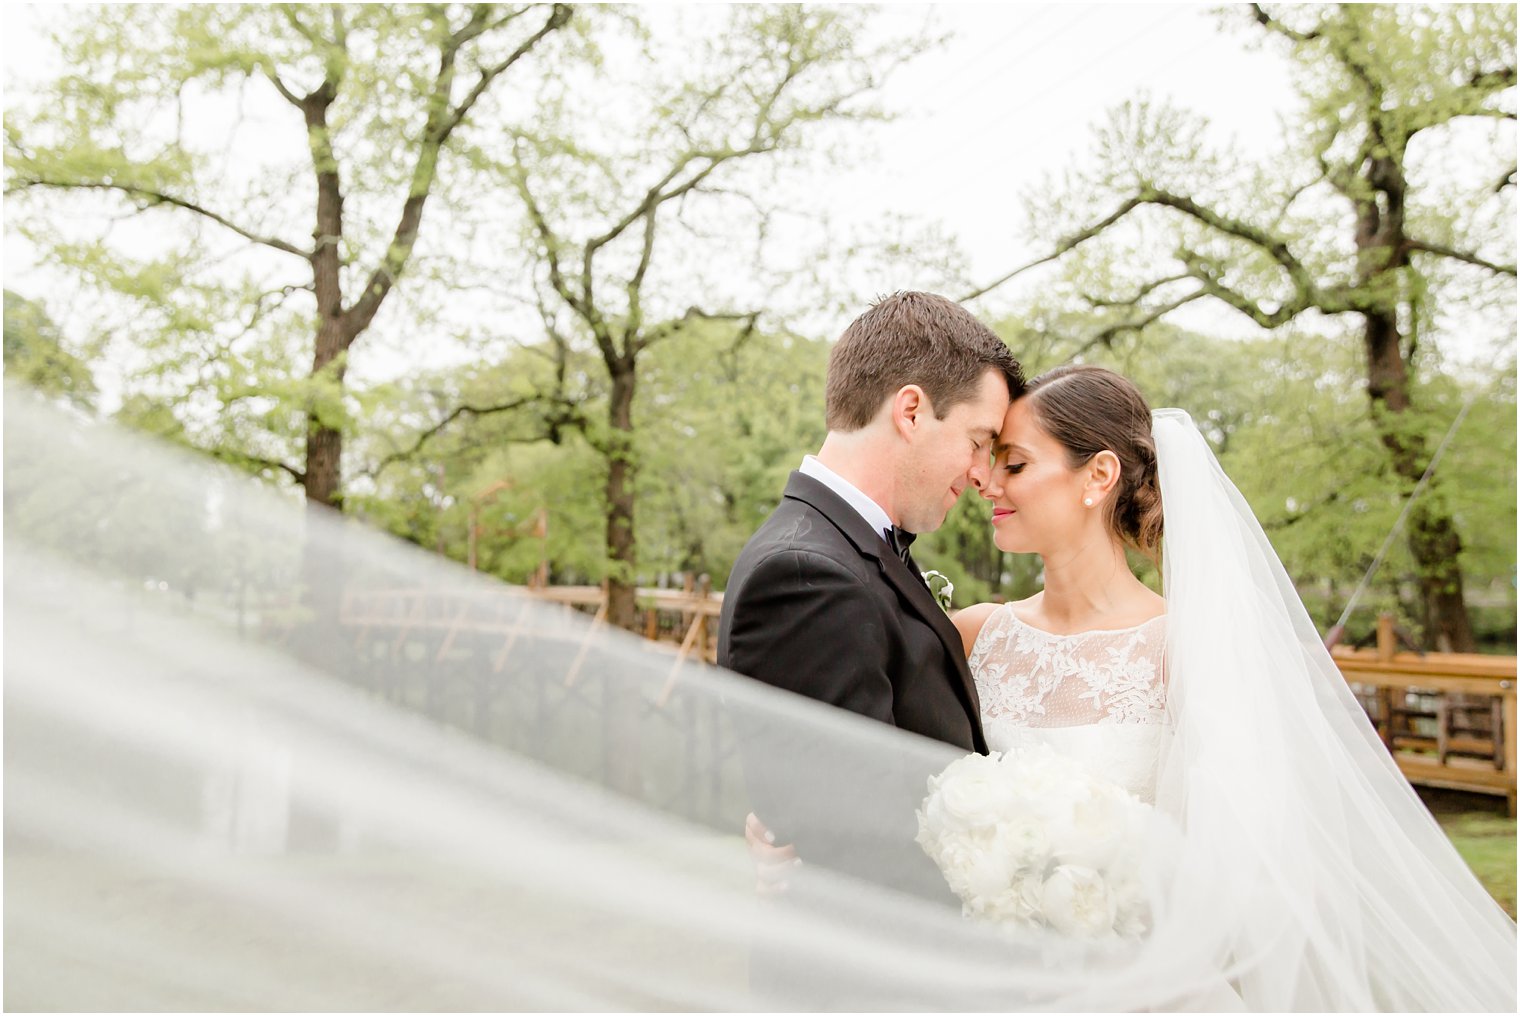 Bride and groom in a swooping veil photo